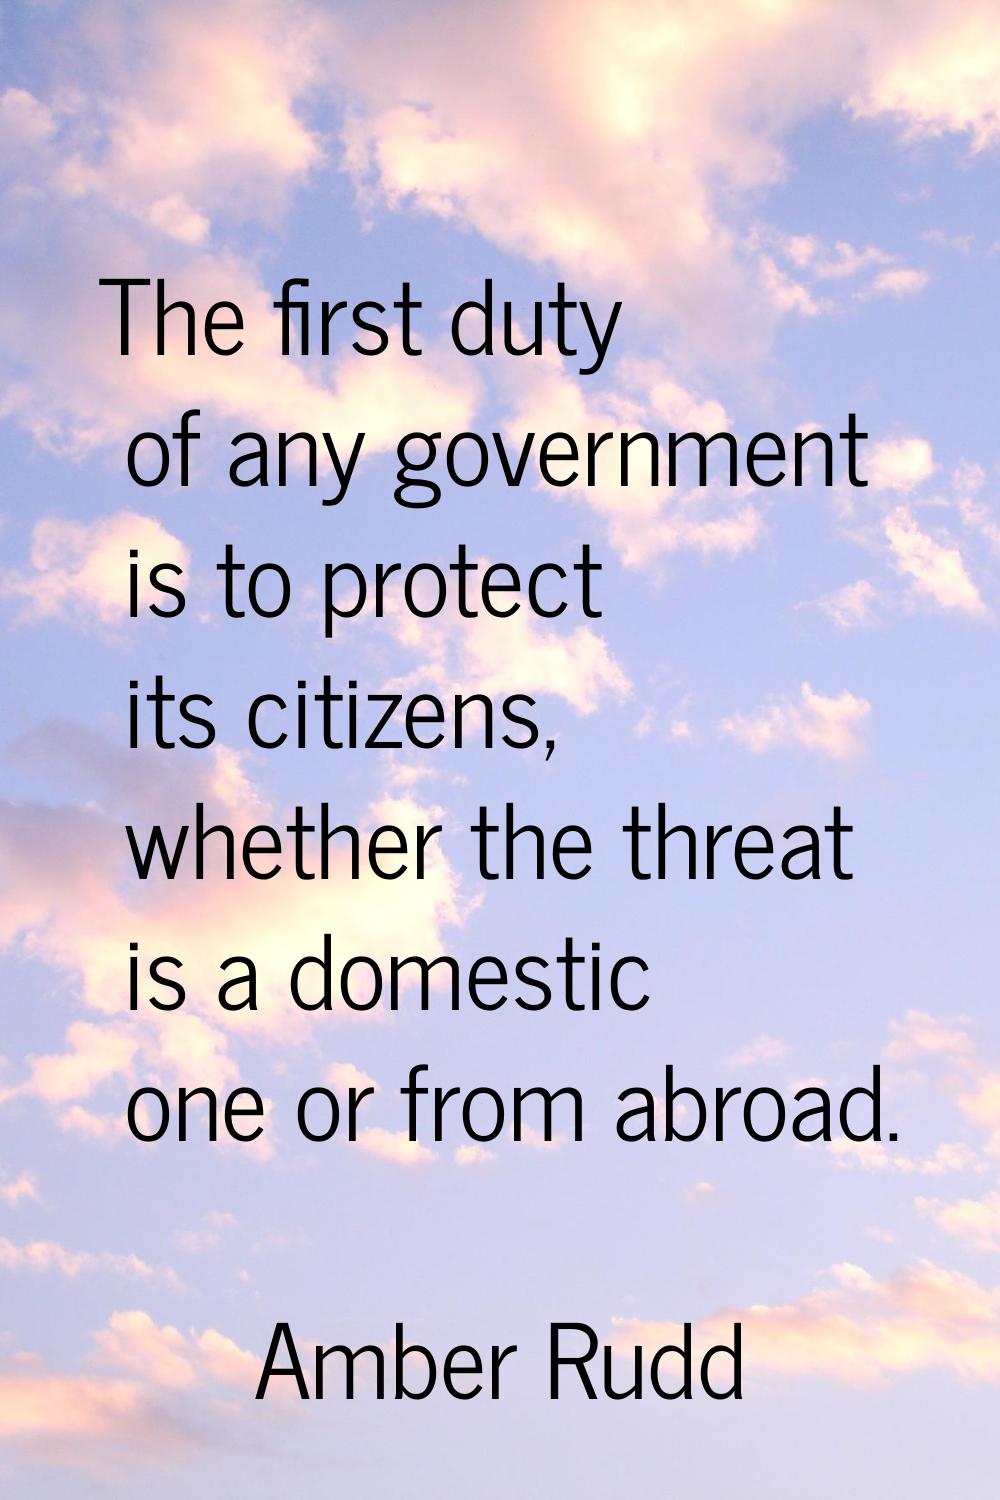 The first duty of any government is to protect its citizens, whether the threat is a domestic one o